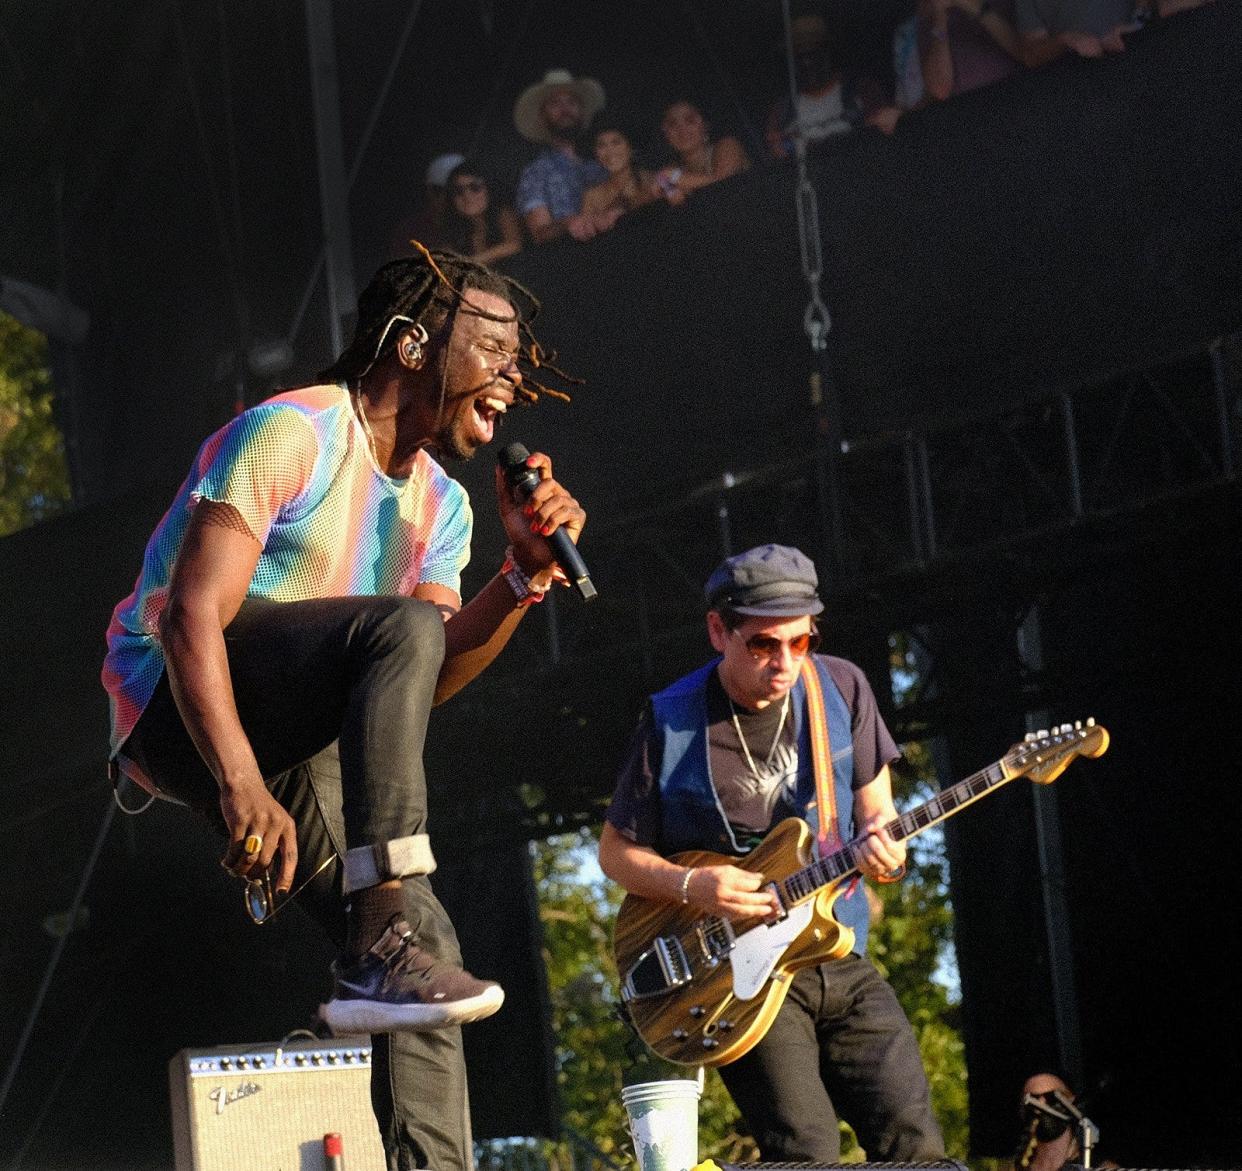 The second album from the Black Pumas, "Chronicles of a Diamond," drops on Oct. 27. The band, seen here playing at the second weekend of Austin City Limits Music Festival in 2021, abruptly canceled their European tour last summer. Guitarist and producer Adrian Quesada said if they hadn't paused the tour it seemed "like we were never going to be able to make another album."